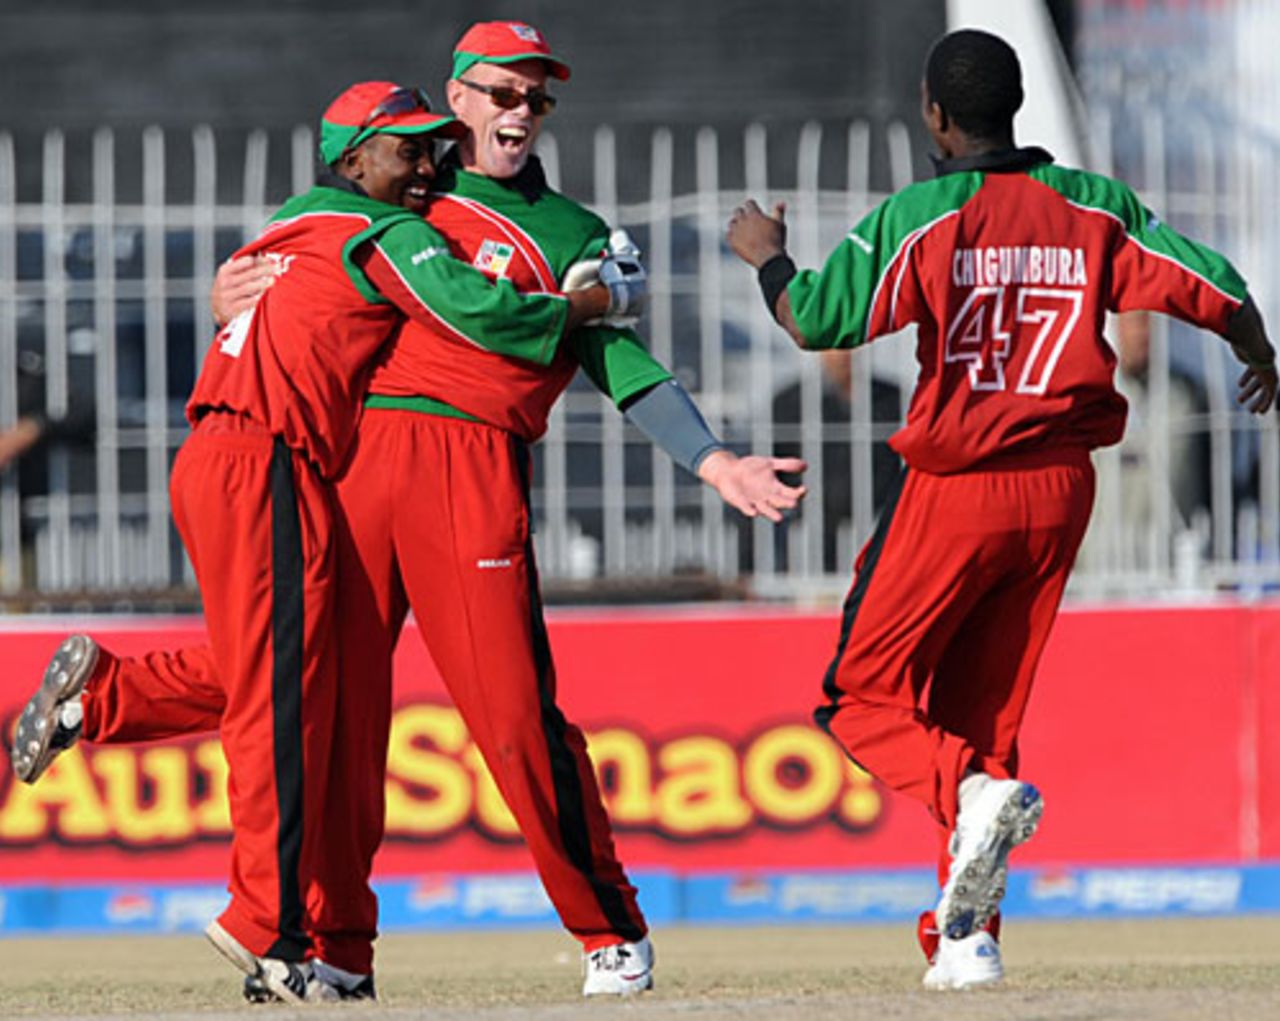 Gary Brent is congratulated by team-mates for taking a catch to dismiss Nasir Jamshed, Pakistan v Zimbabwe, 4th ODI, Mobilink Cup, Faisalabad, January 30, 2008